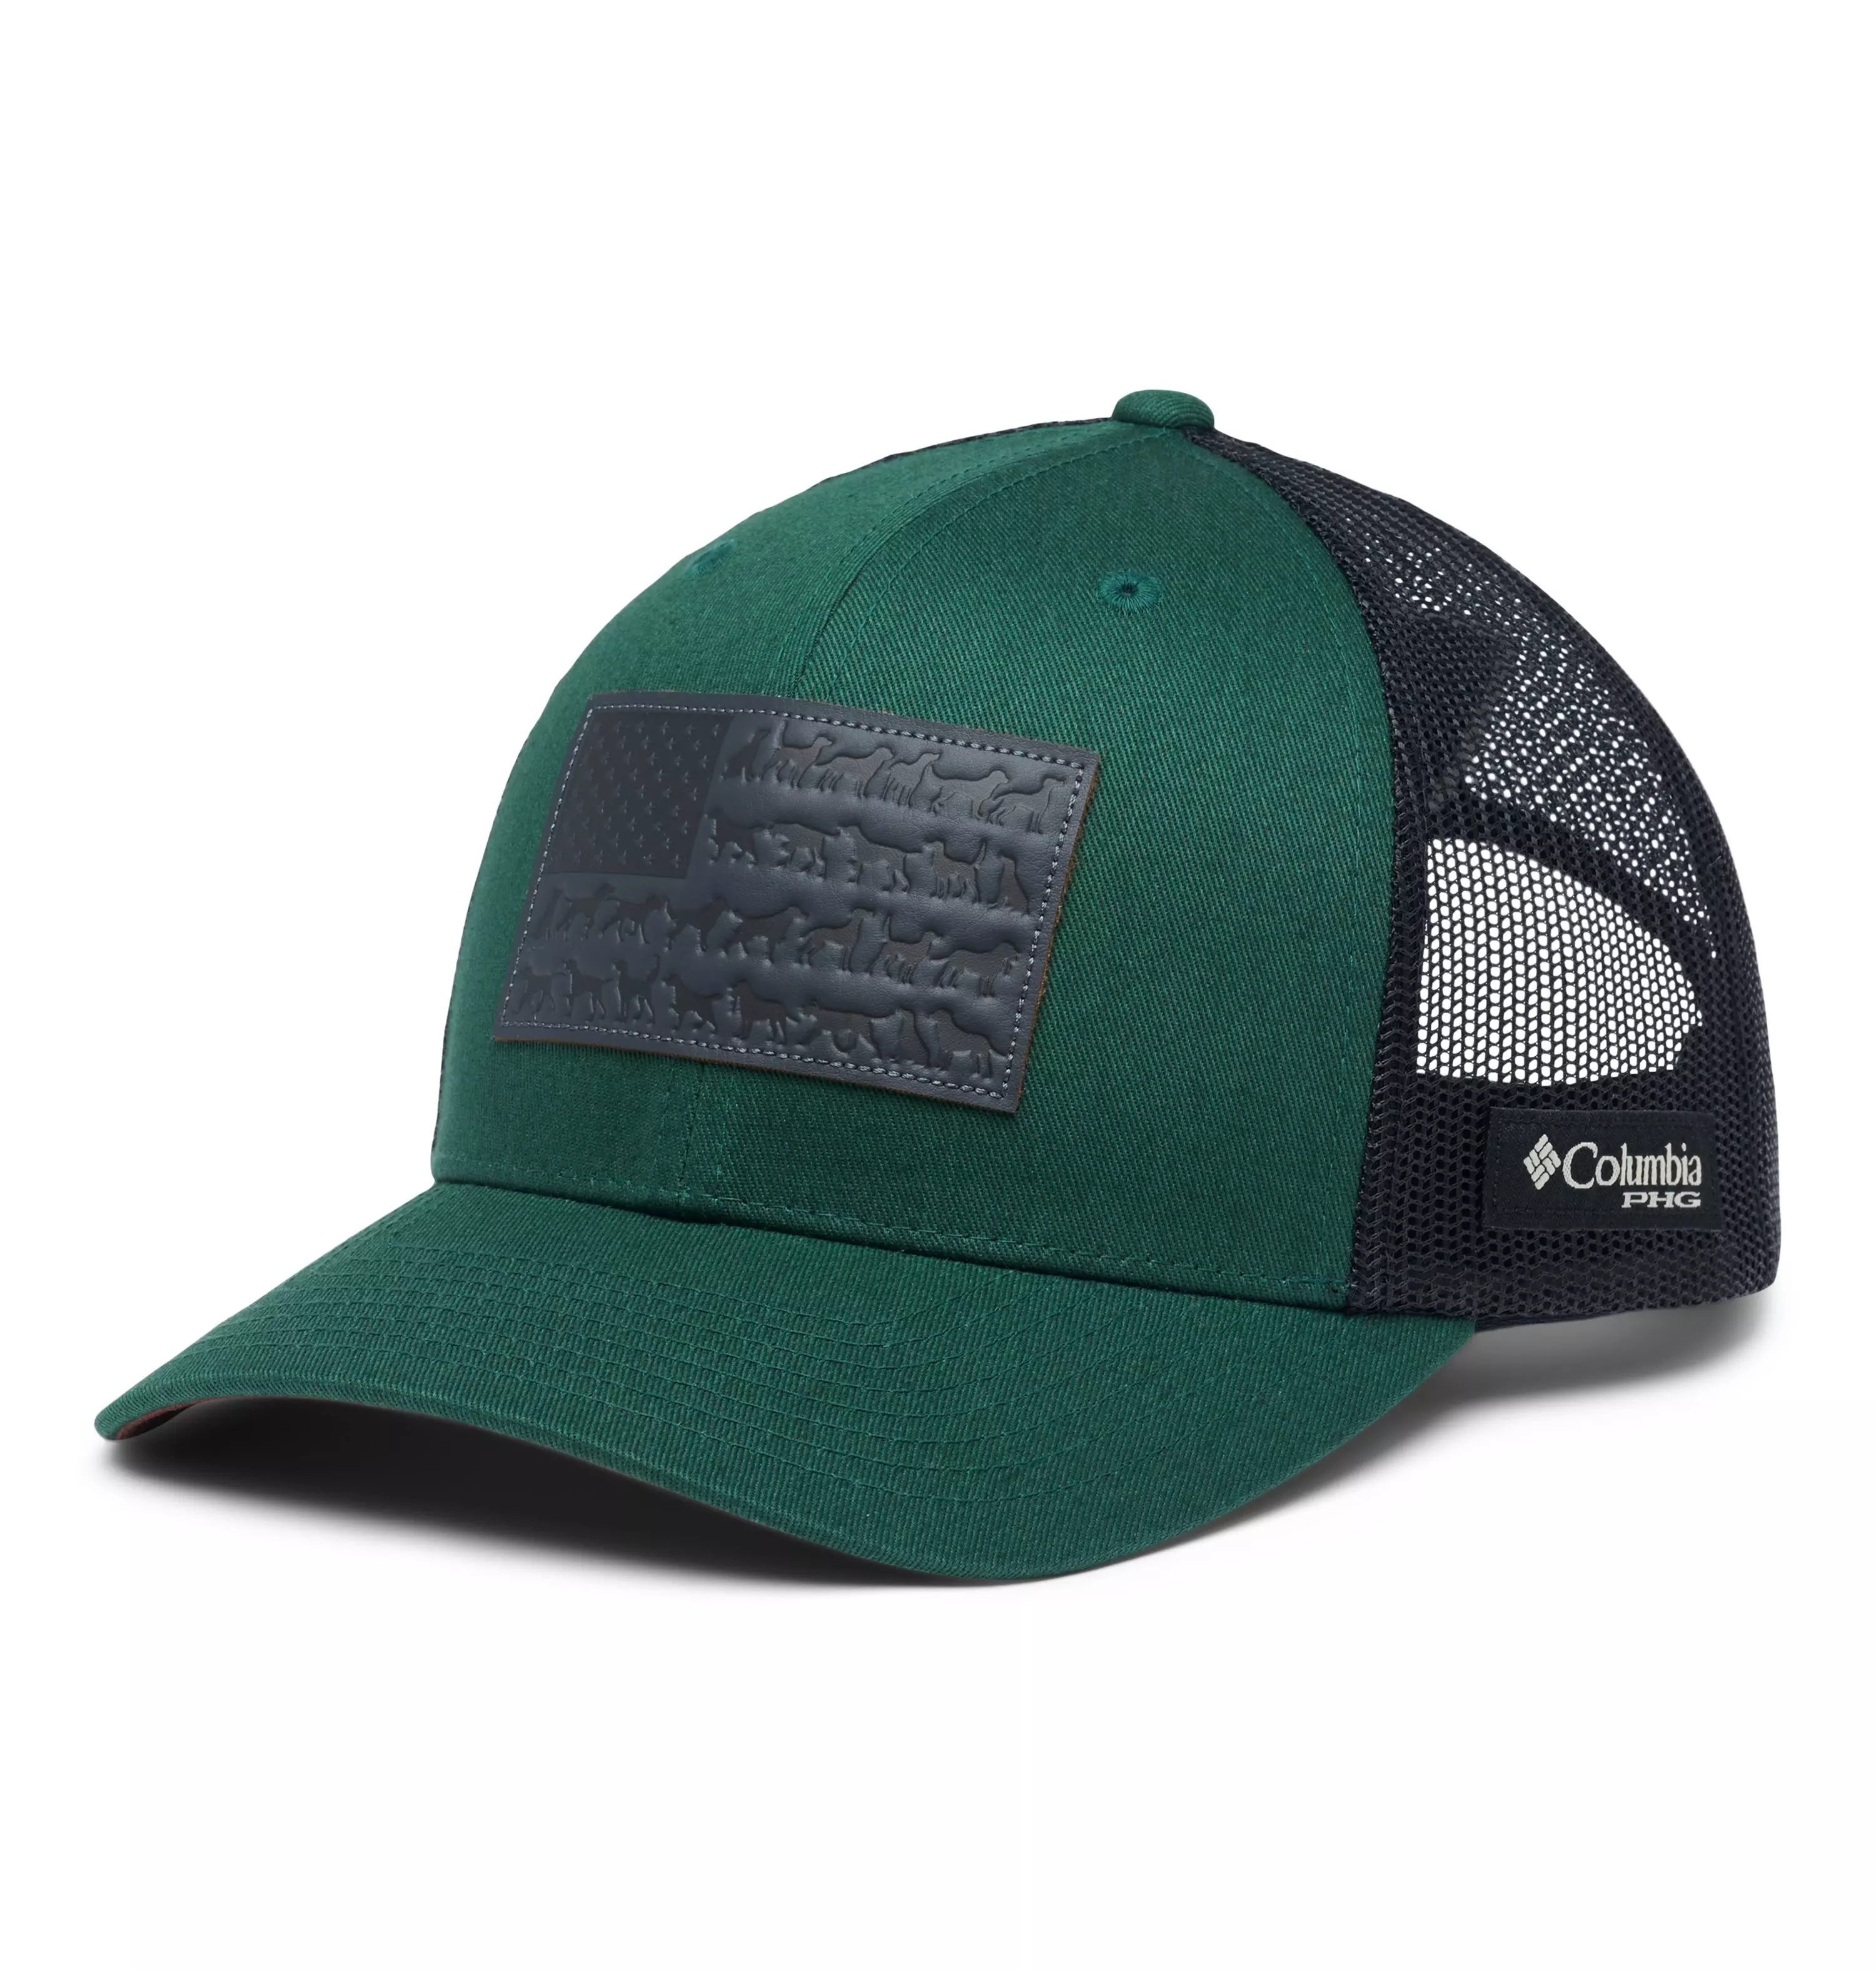 PHG Leather Game Flag Snapback, Green, Polyester/Cotton/Leather